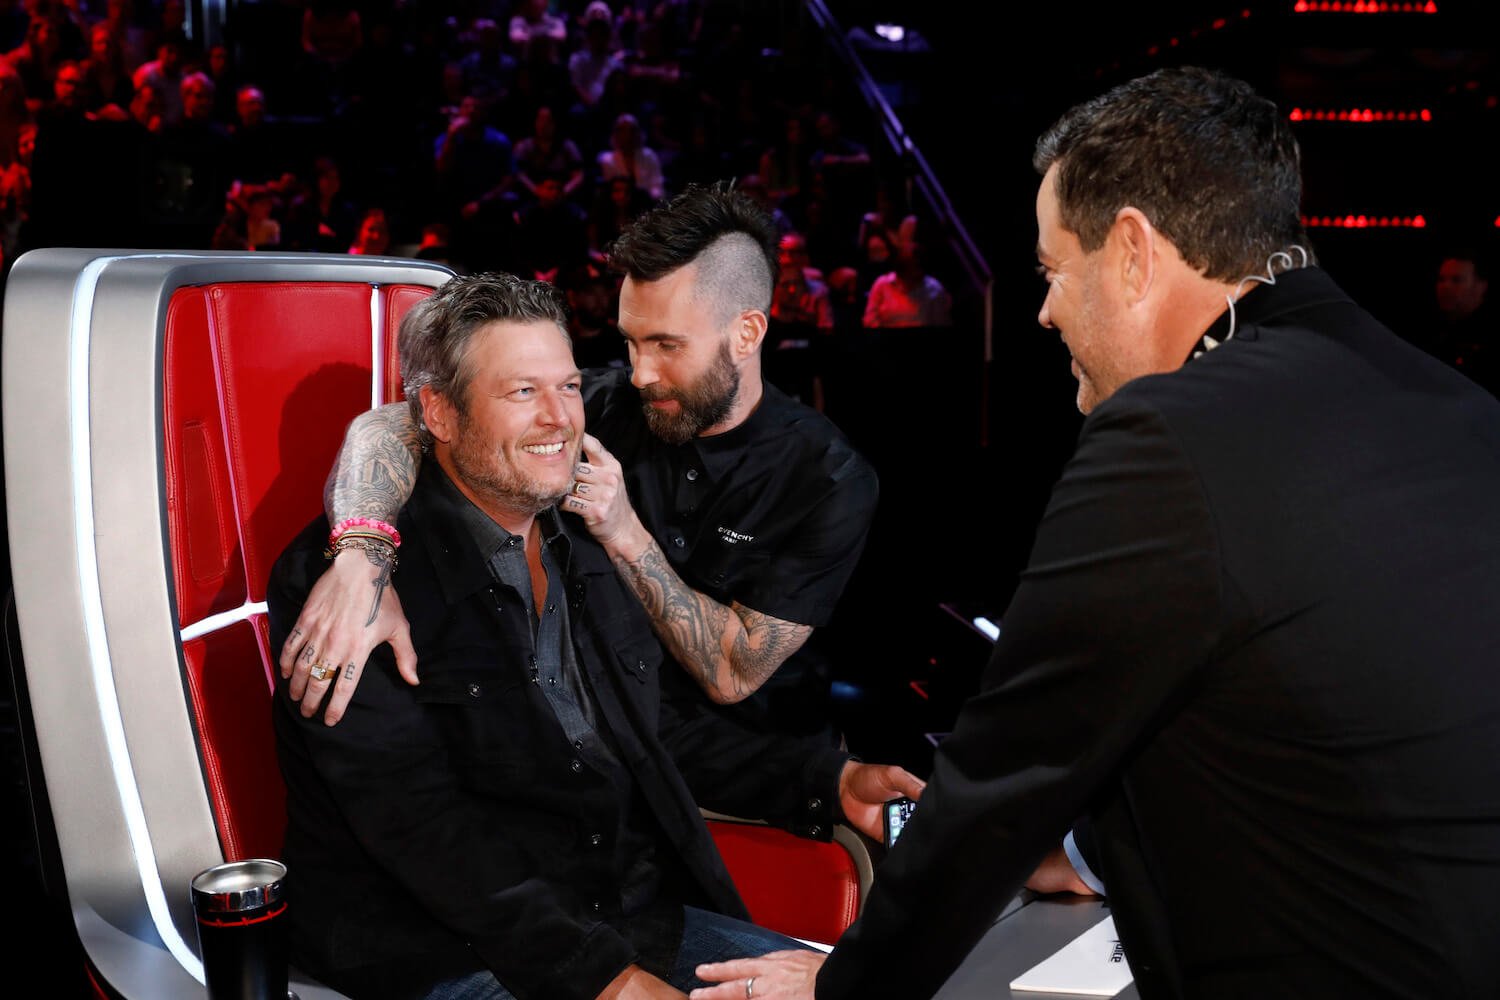 Adam Levine touching Blake Shelton's face in 'The Voice' with host Carson Daly watching